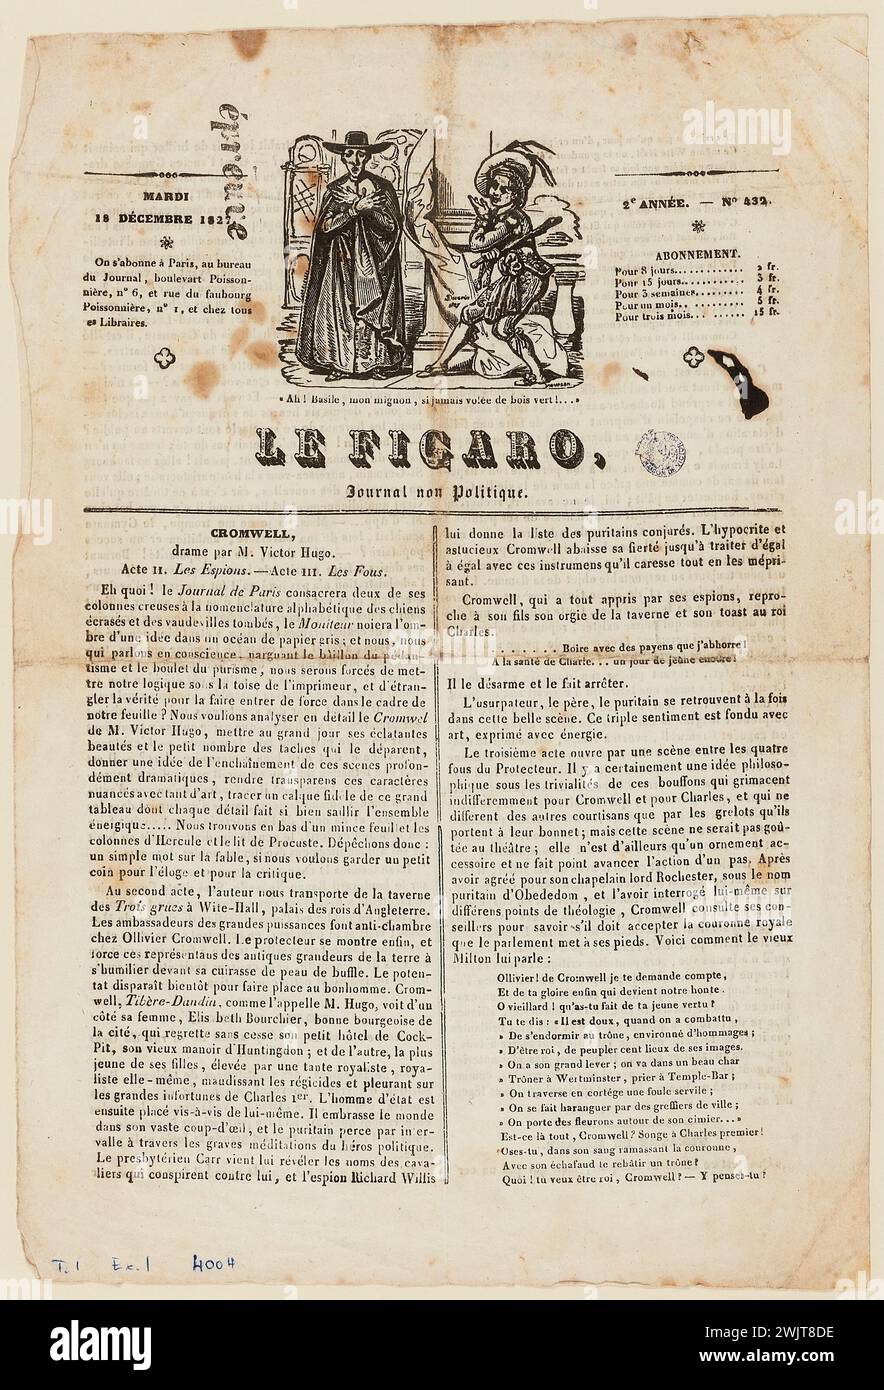 Cromwell, drama by Mr. Victor Hugo. Act II. The spies. -Act III. Crazypeople. Le Figaro, non-political newspaper, Tuesday December 18, 1827 (dummy title), 1827-12-18. Ink on paper. Houses of Victor Hugo Paris - Guernsey. Stock Photo